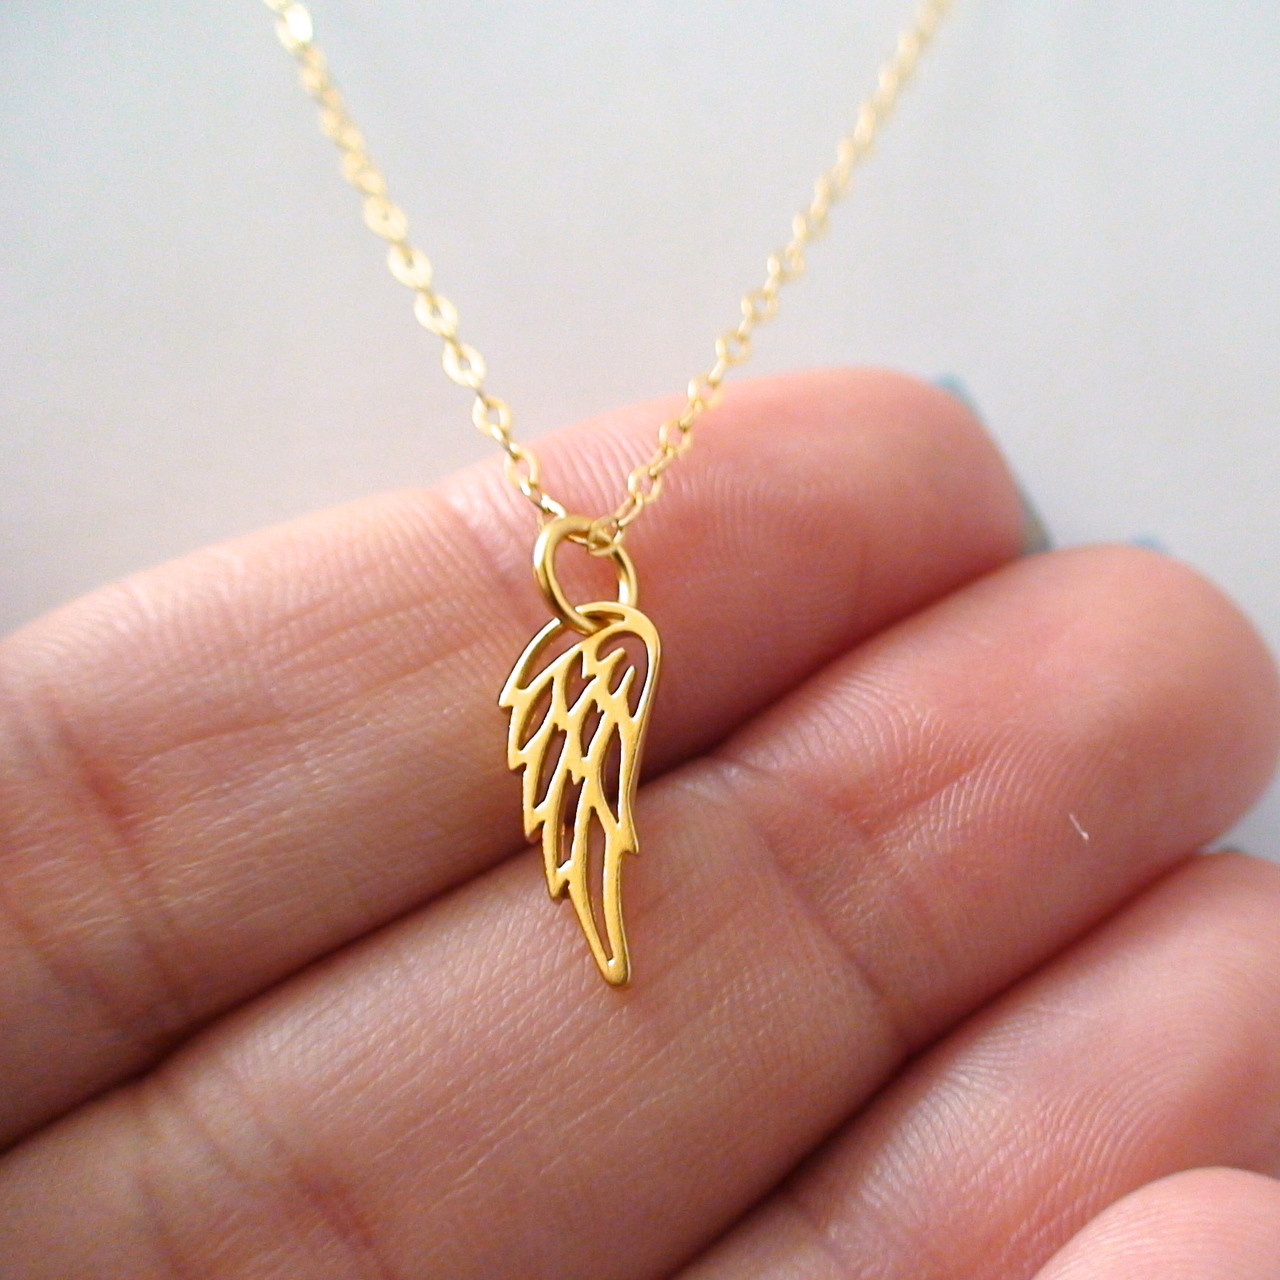 Tiny Angel Wing Charm Necklace - 24K Gold Plate Sterling Silver